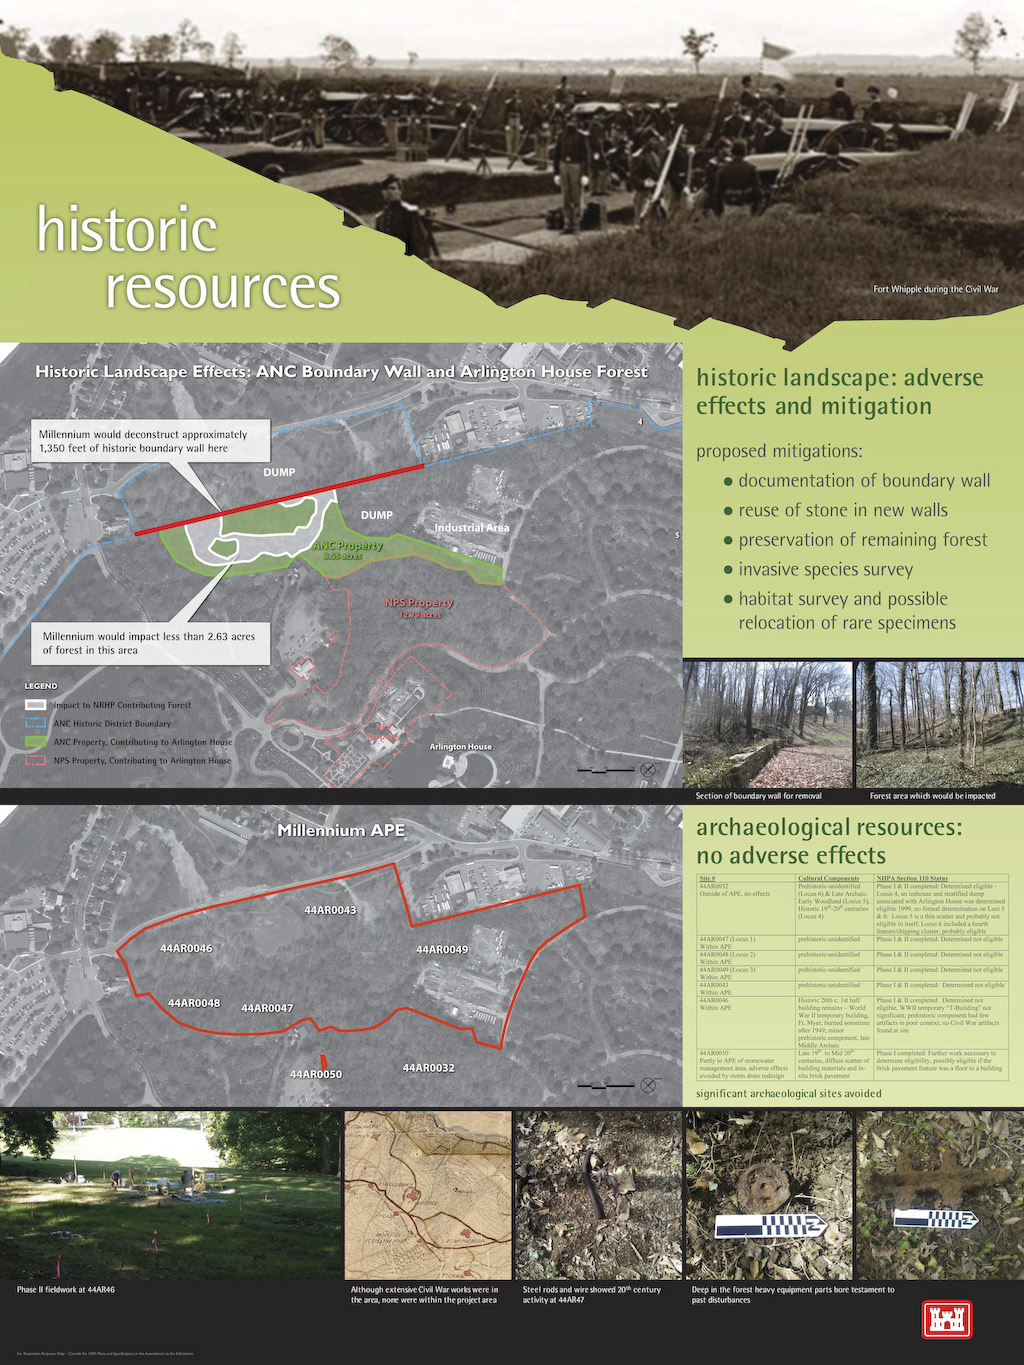 A graphic overview of the historic resources located within the boundaries of Arlington National Cemetery's Millennium Project. The project will add 30,000 burial and niche spaces to the cemetery. 